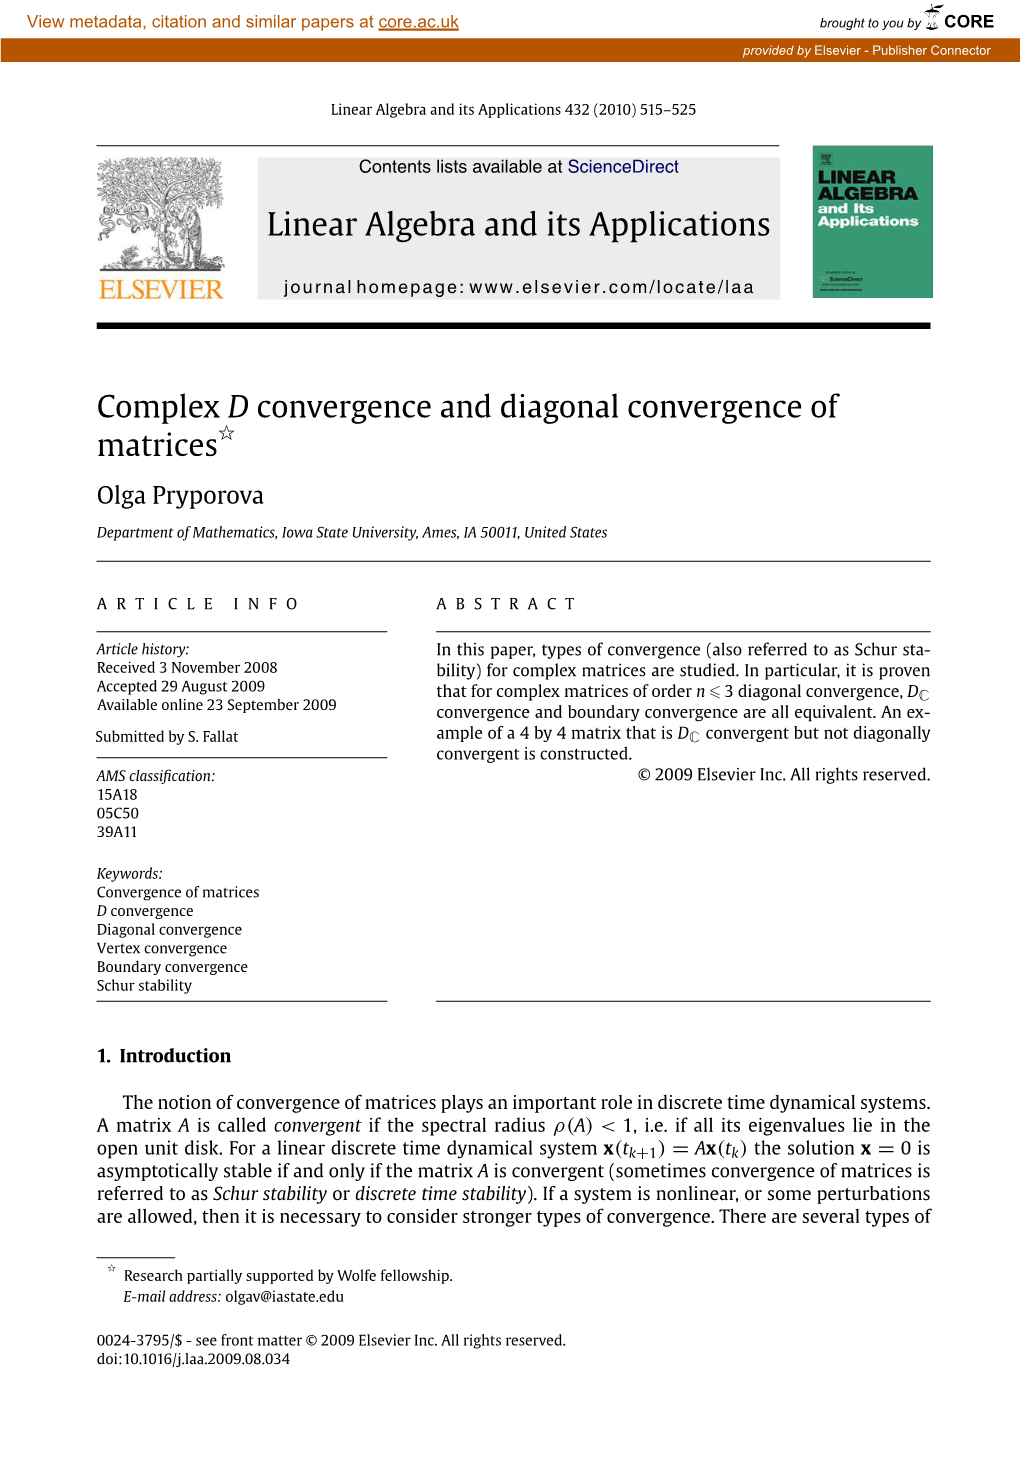 Complex D Convergence and Diagonal Convergence of Matrices